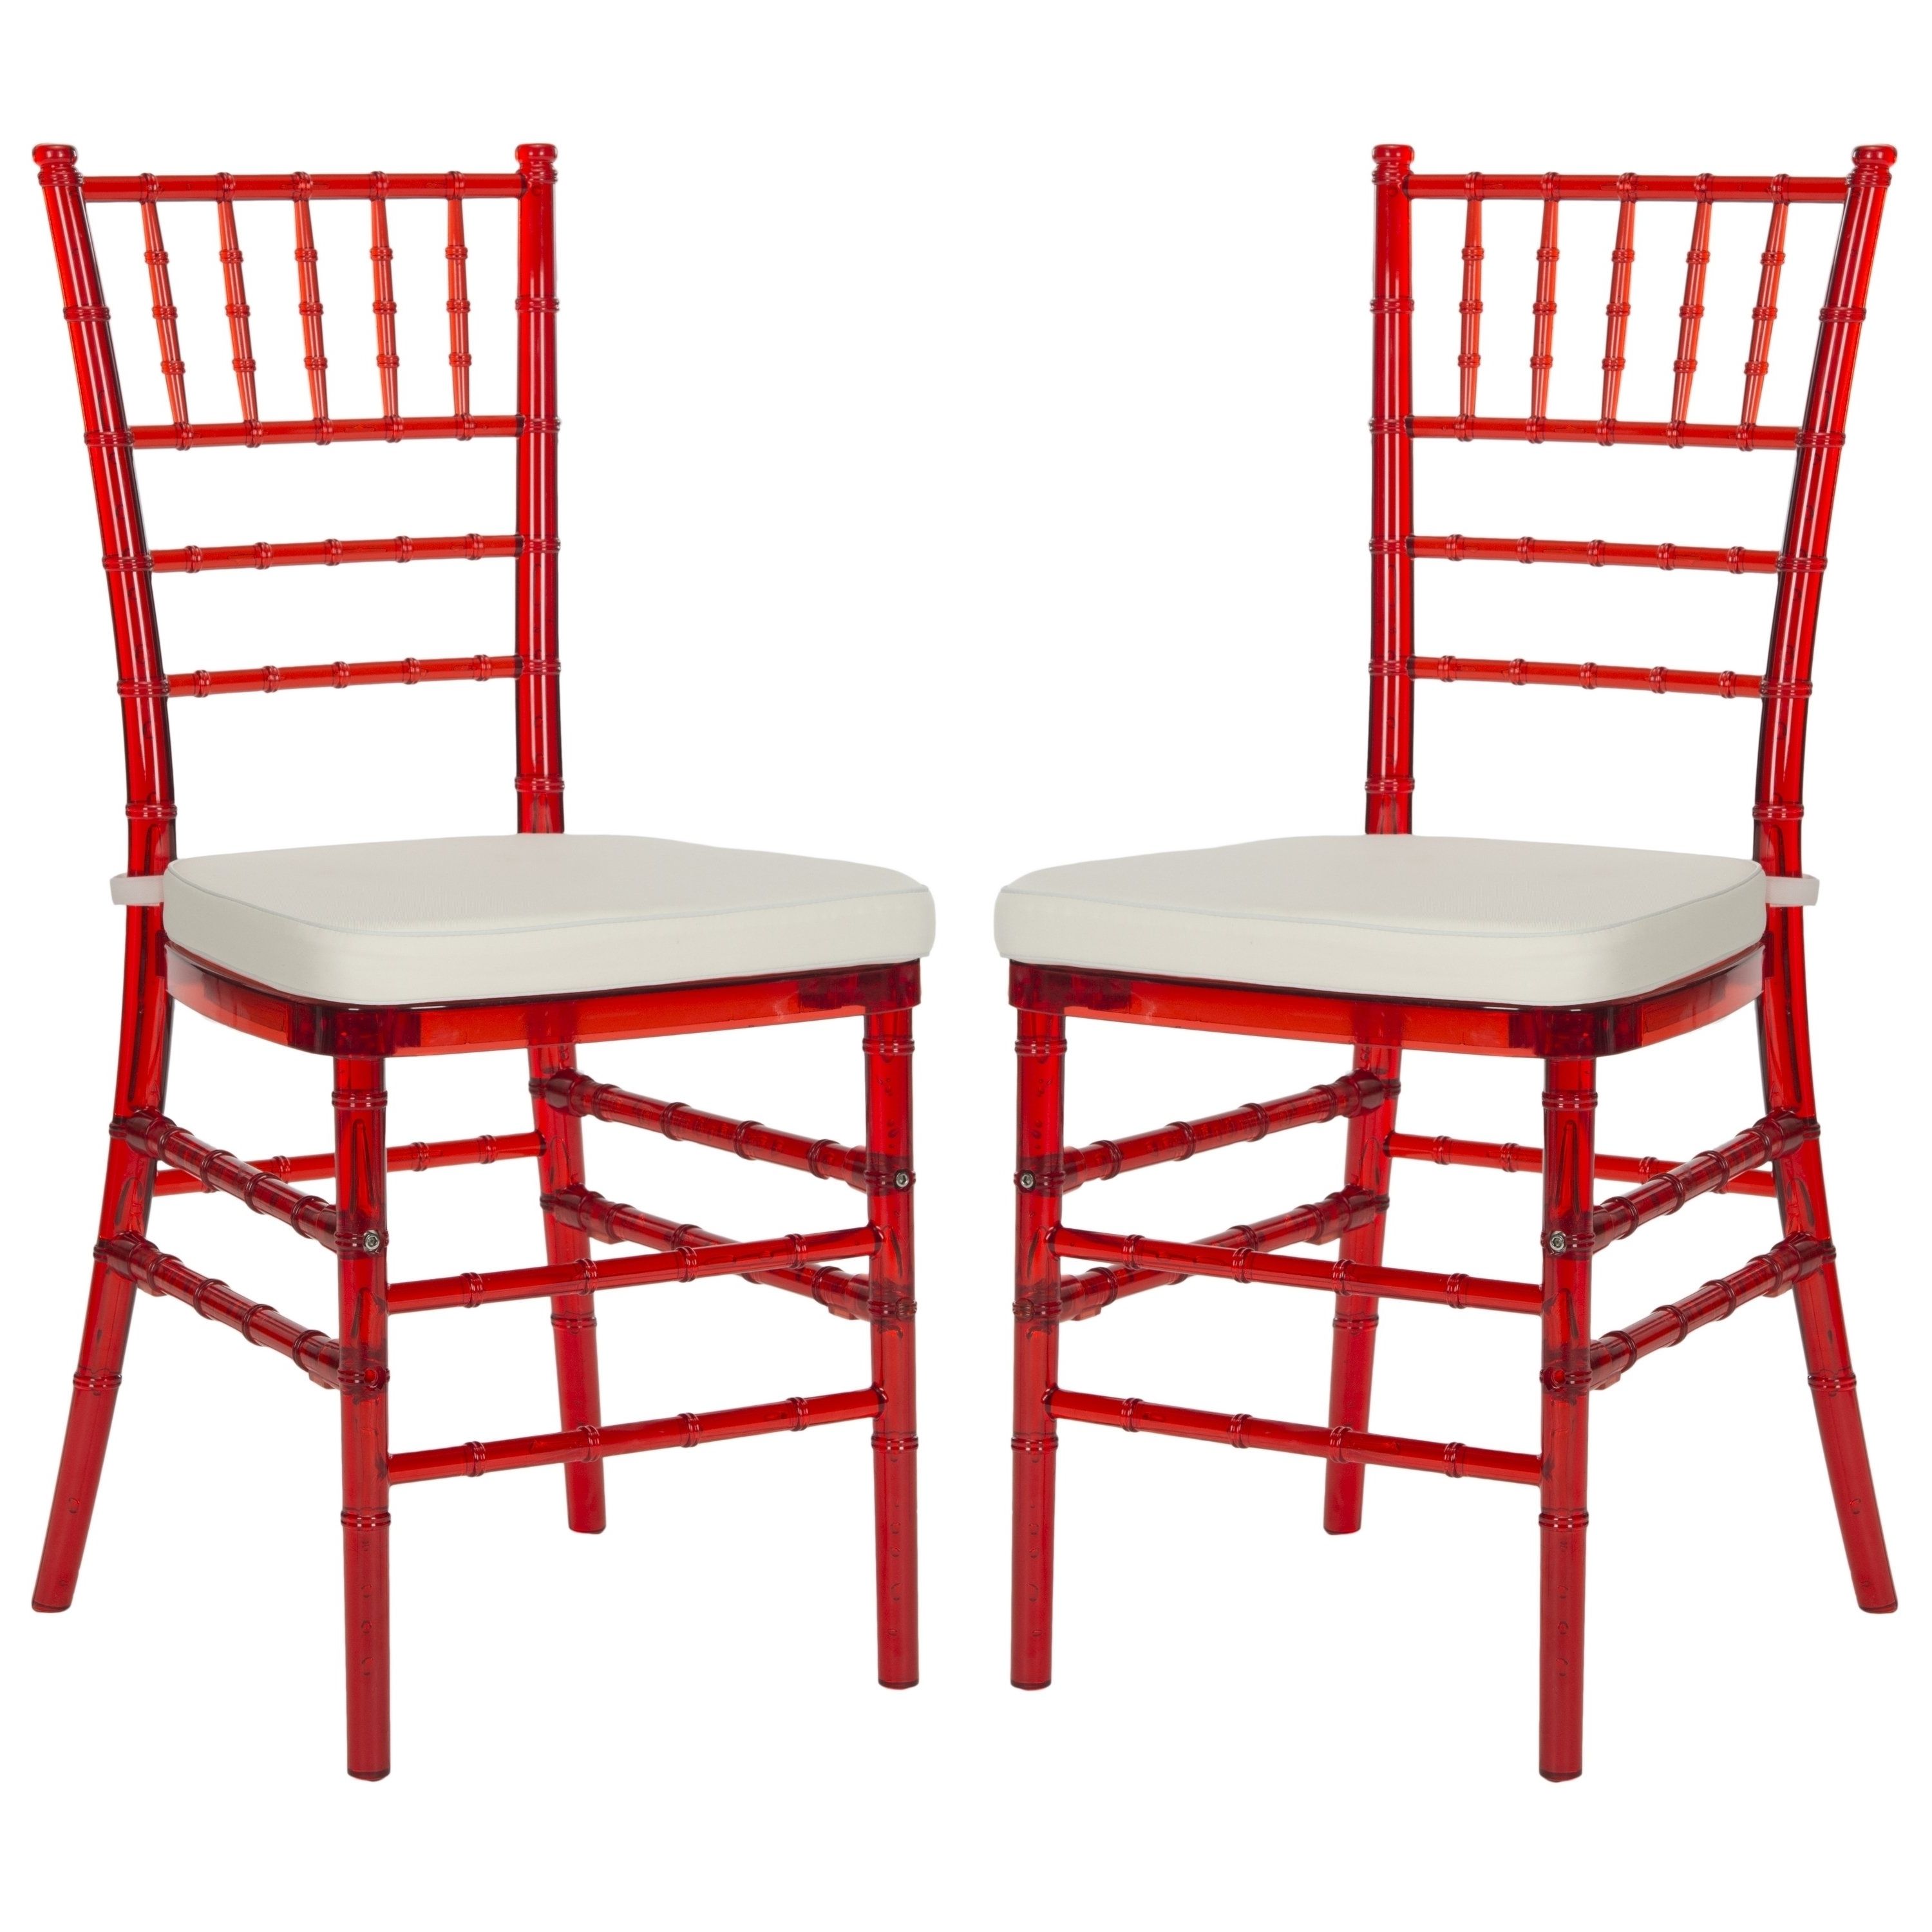 Carly Side Chairs Inside Current Safavieh Country Classic Dining Carly Red Dining Chairs (set Of  (View 15 of 20)